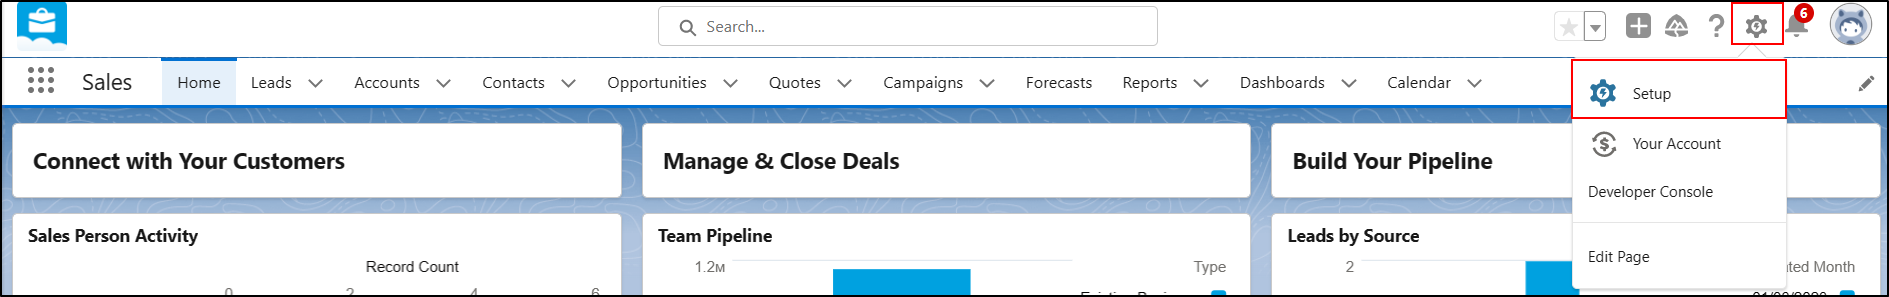 Salesforce-Single-Sign-On-navigate-to-setting-icon-then-click-on-setup